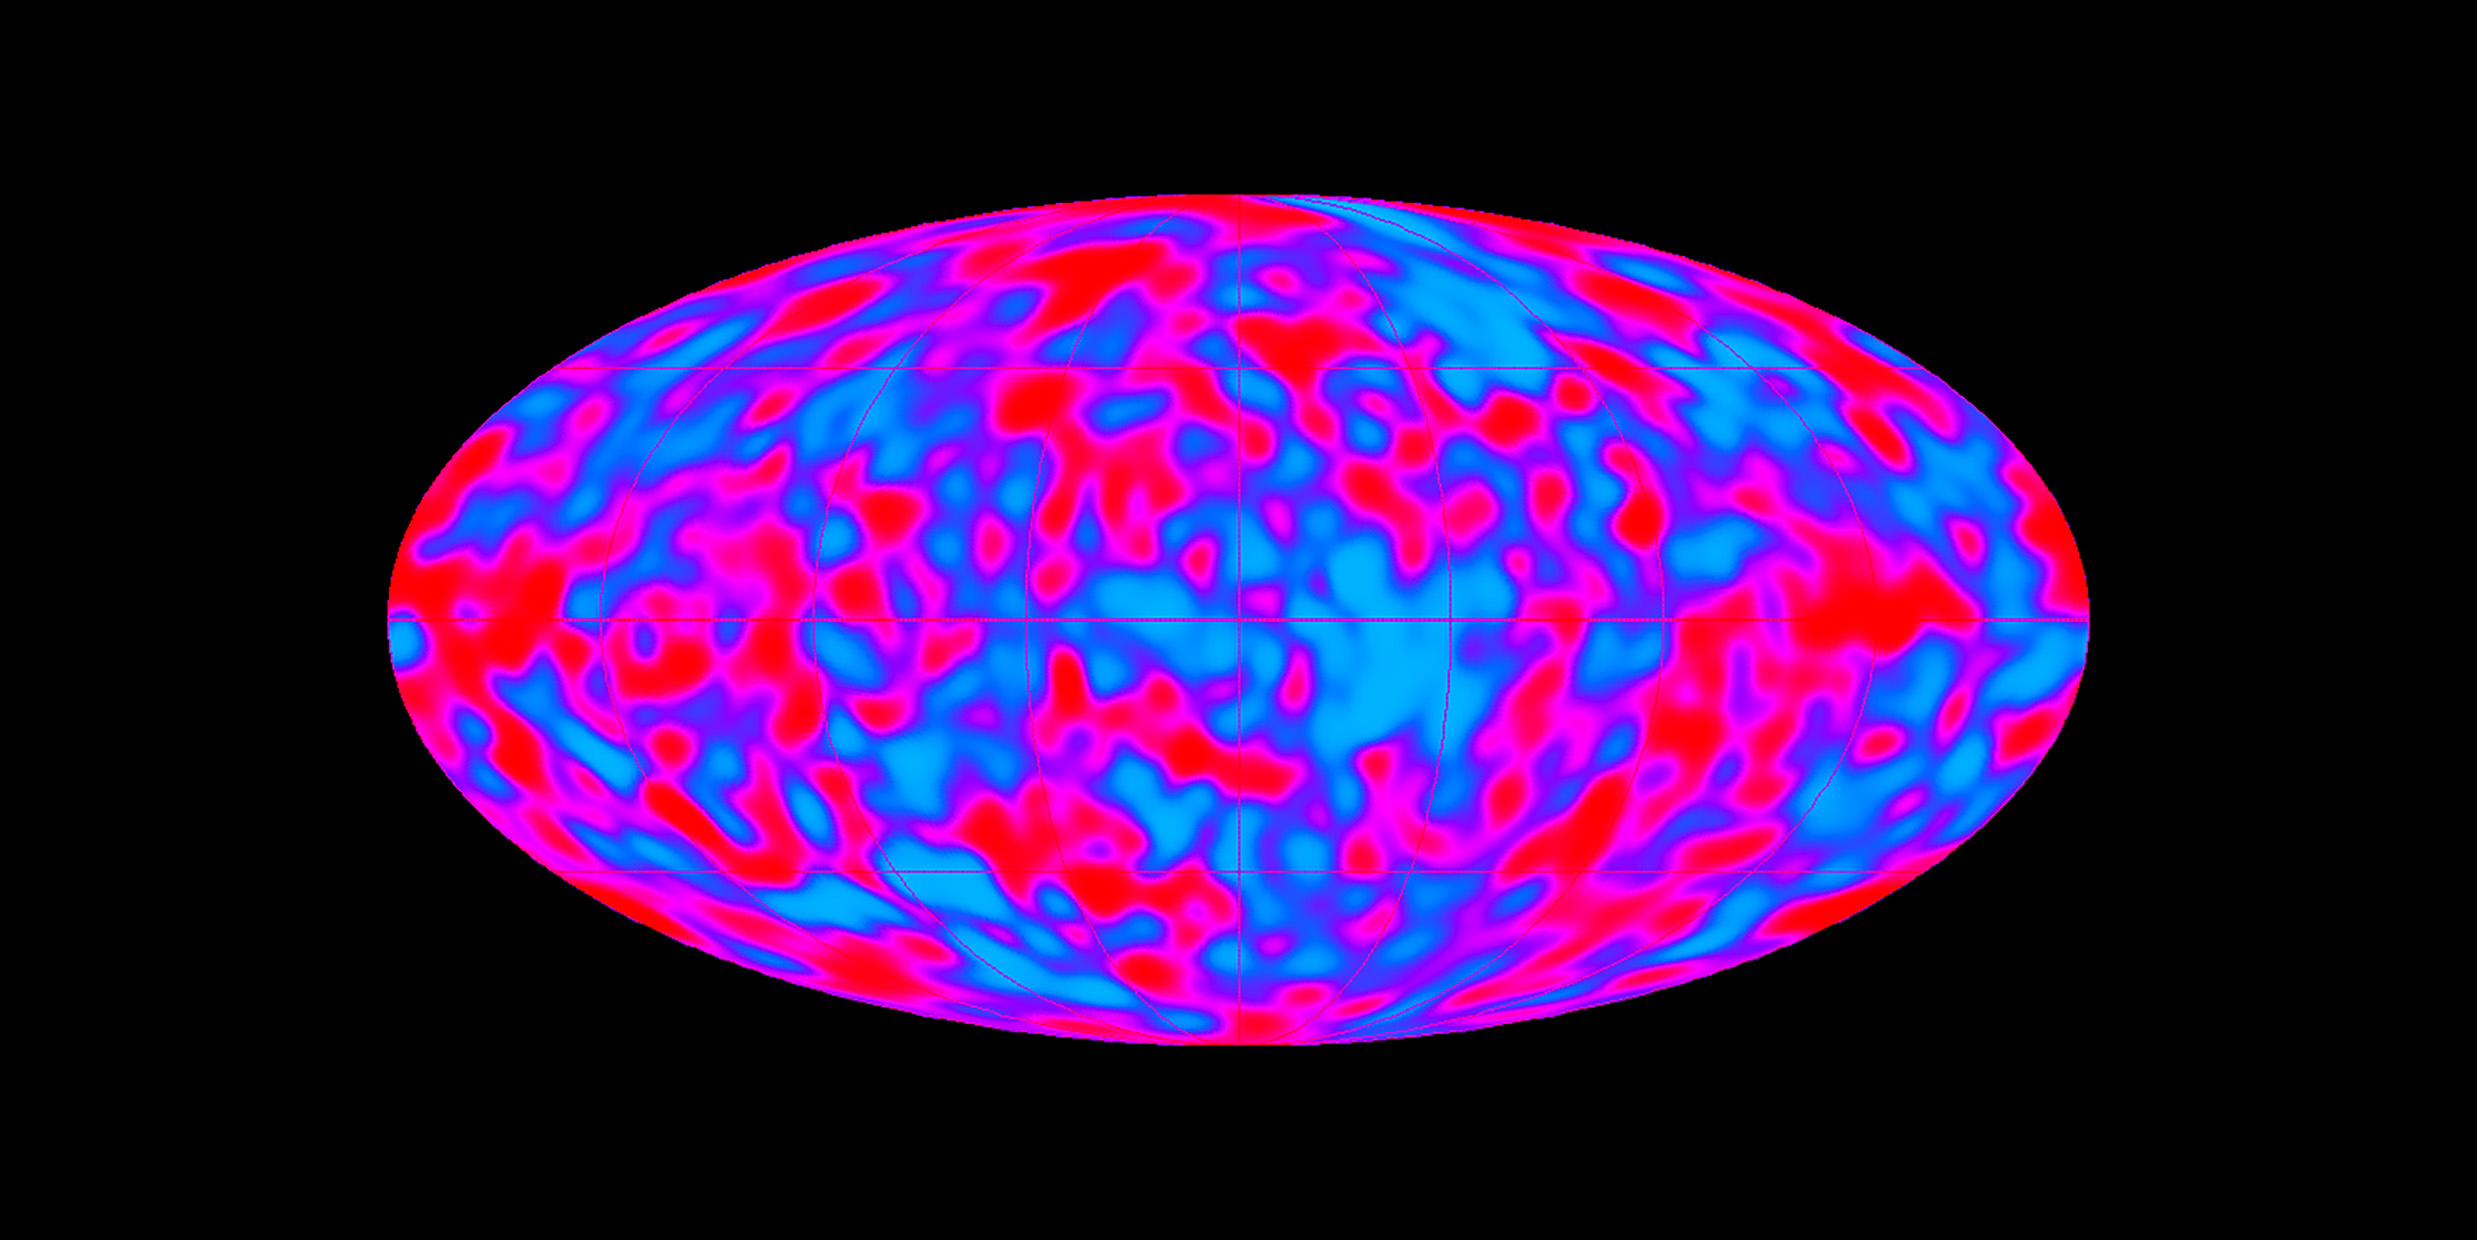 Oval-shaped red and blue map of the Cosmic Microwave Background radiation